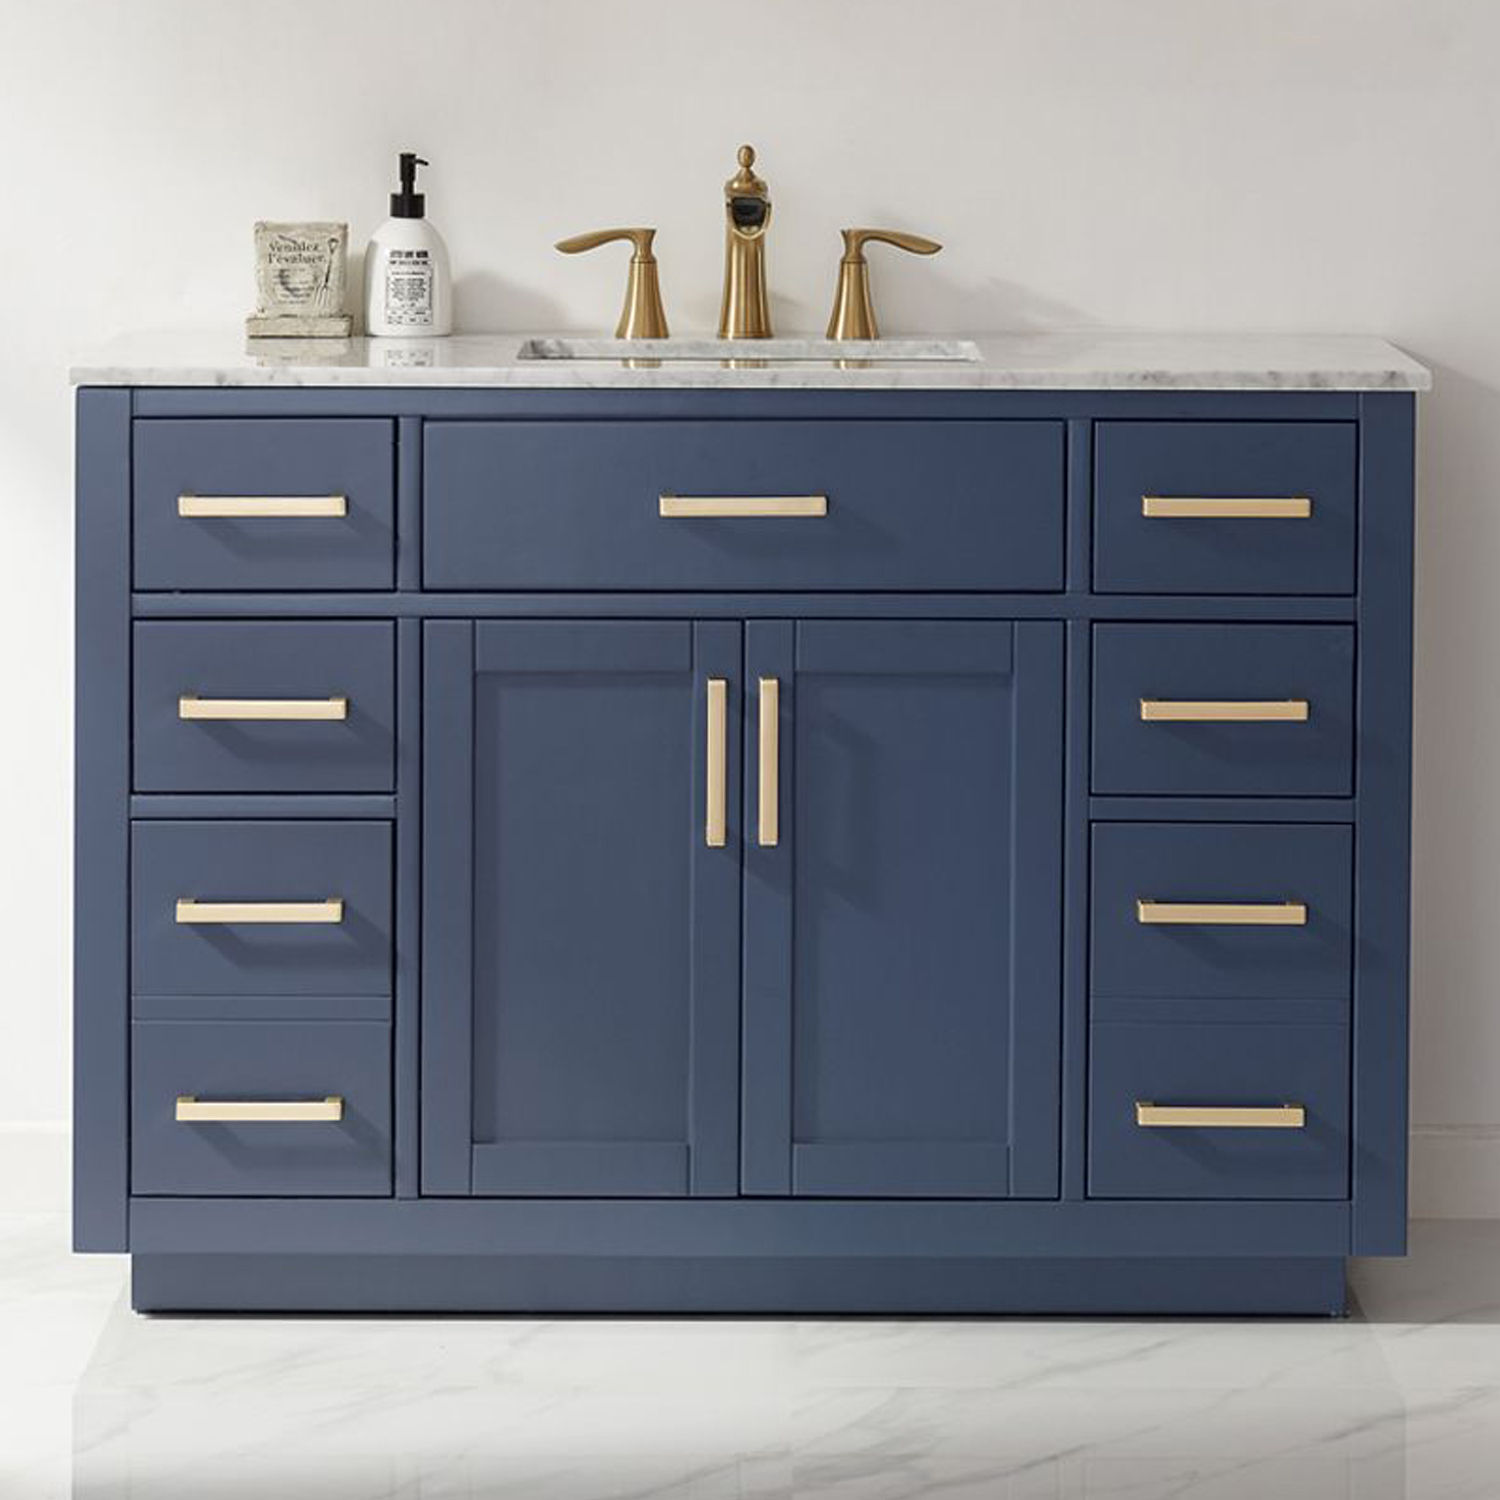 Issac Edwards Collection 48" Single Bathroom Vanity Set in RoyalBlue and Carrara White Marble Countertop